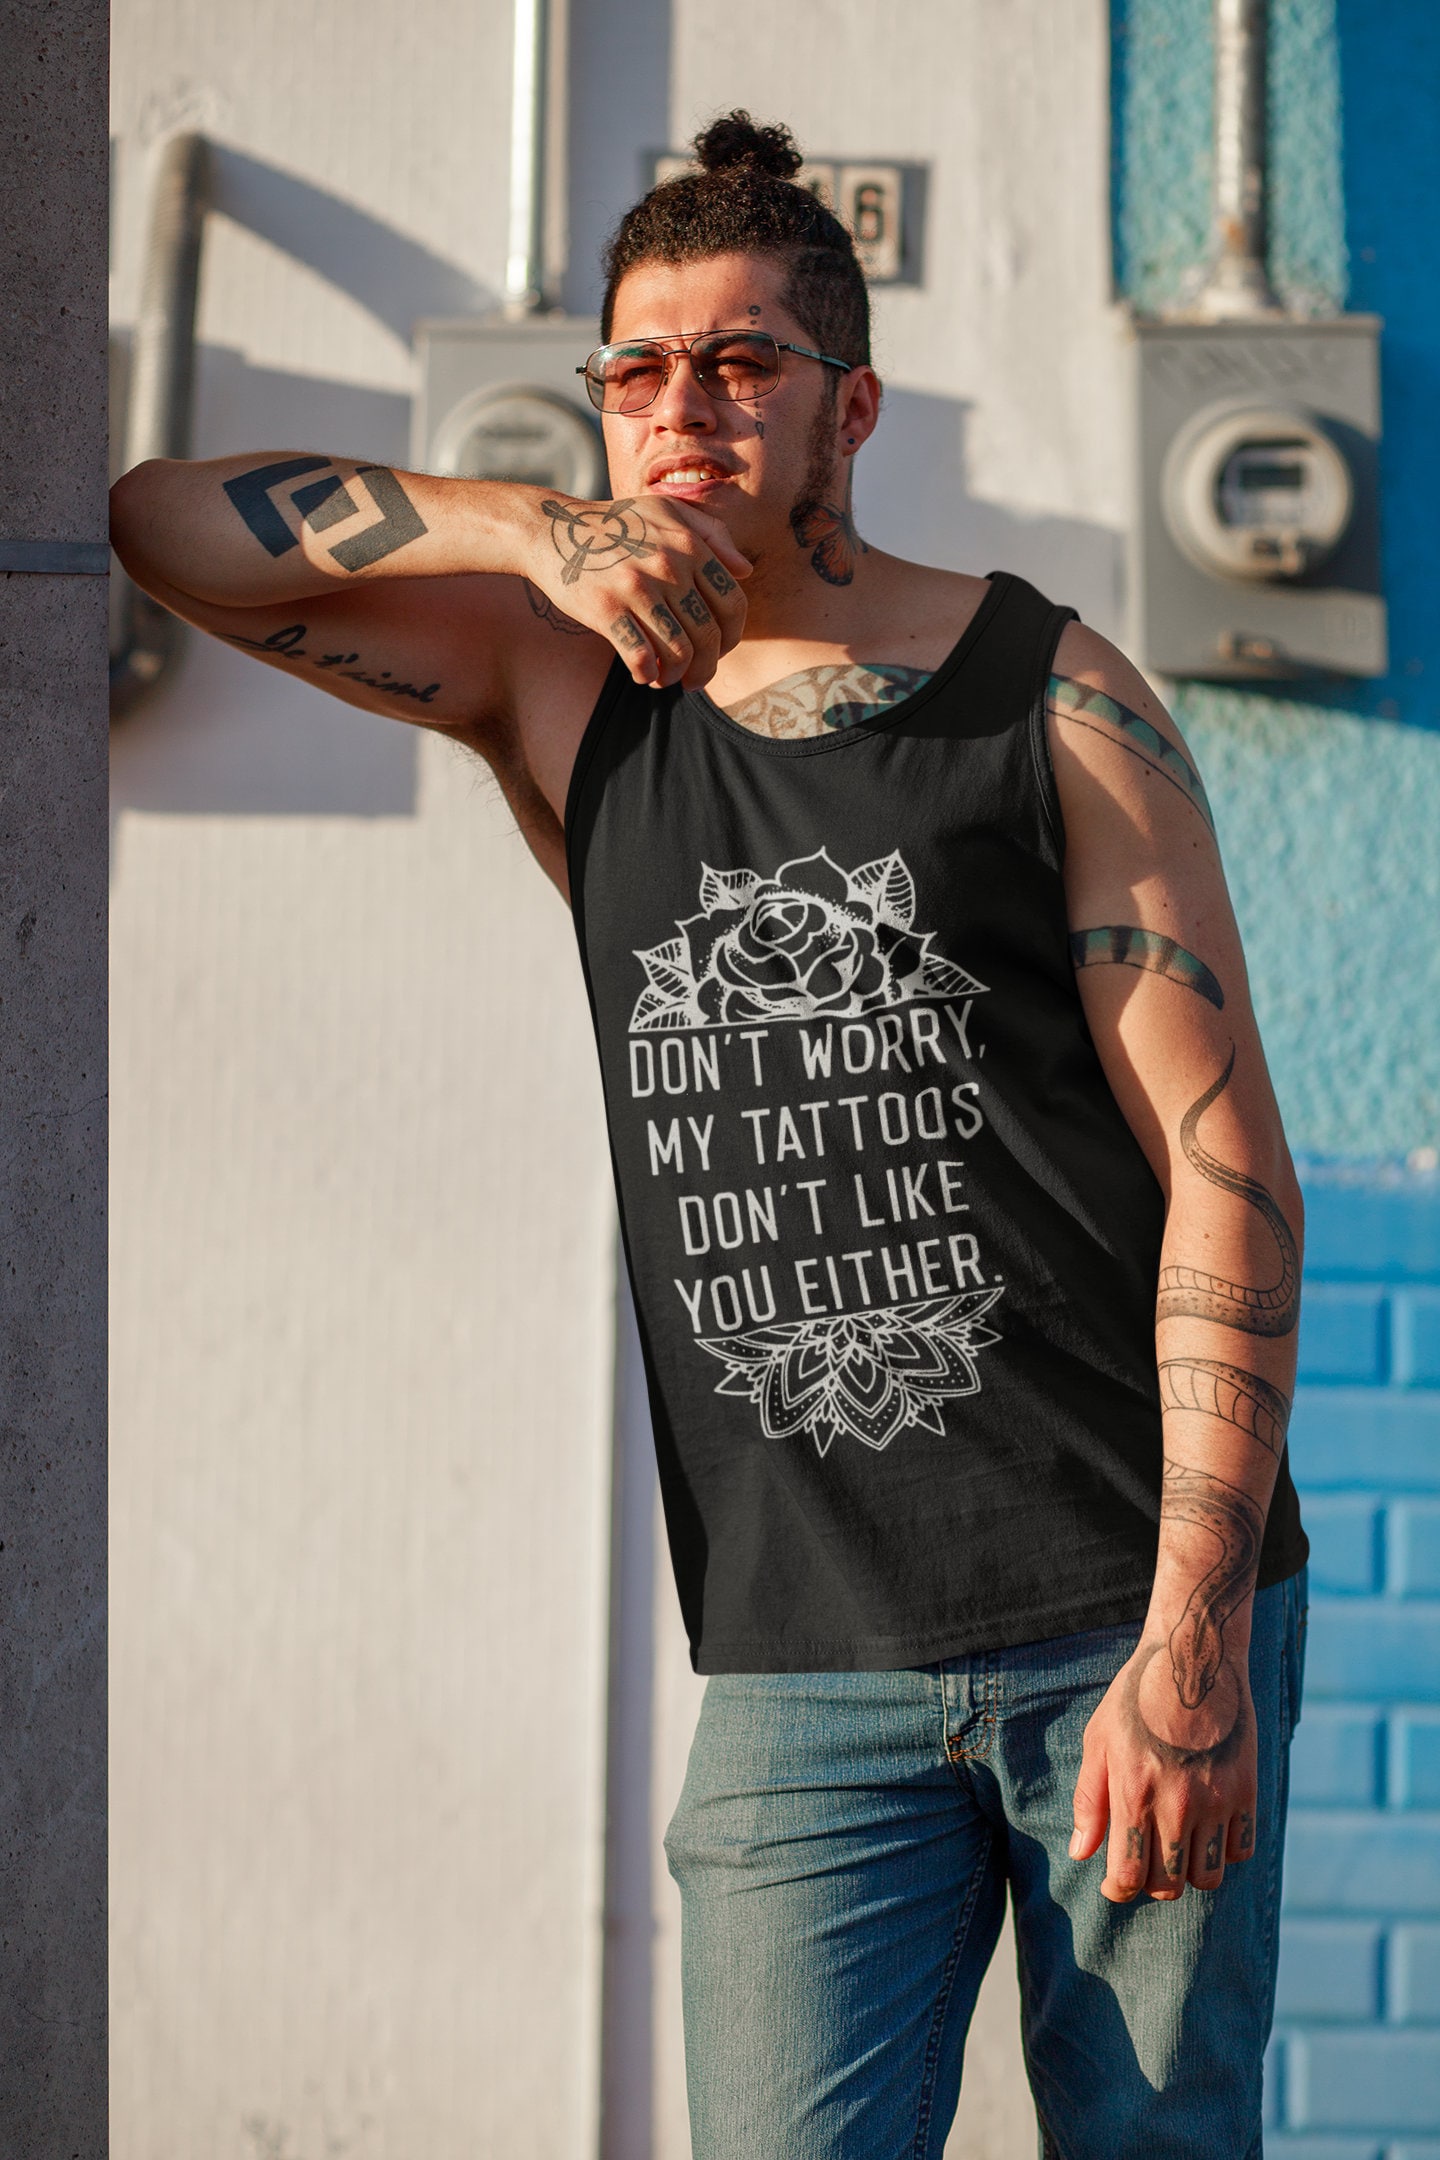 Premium Photo  A man with tattoos on his arms and a black tank top